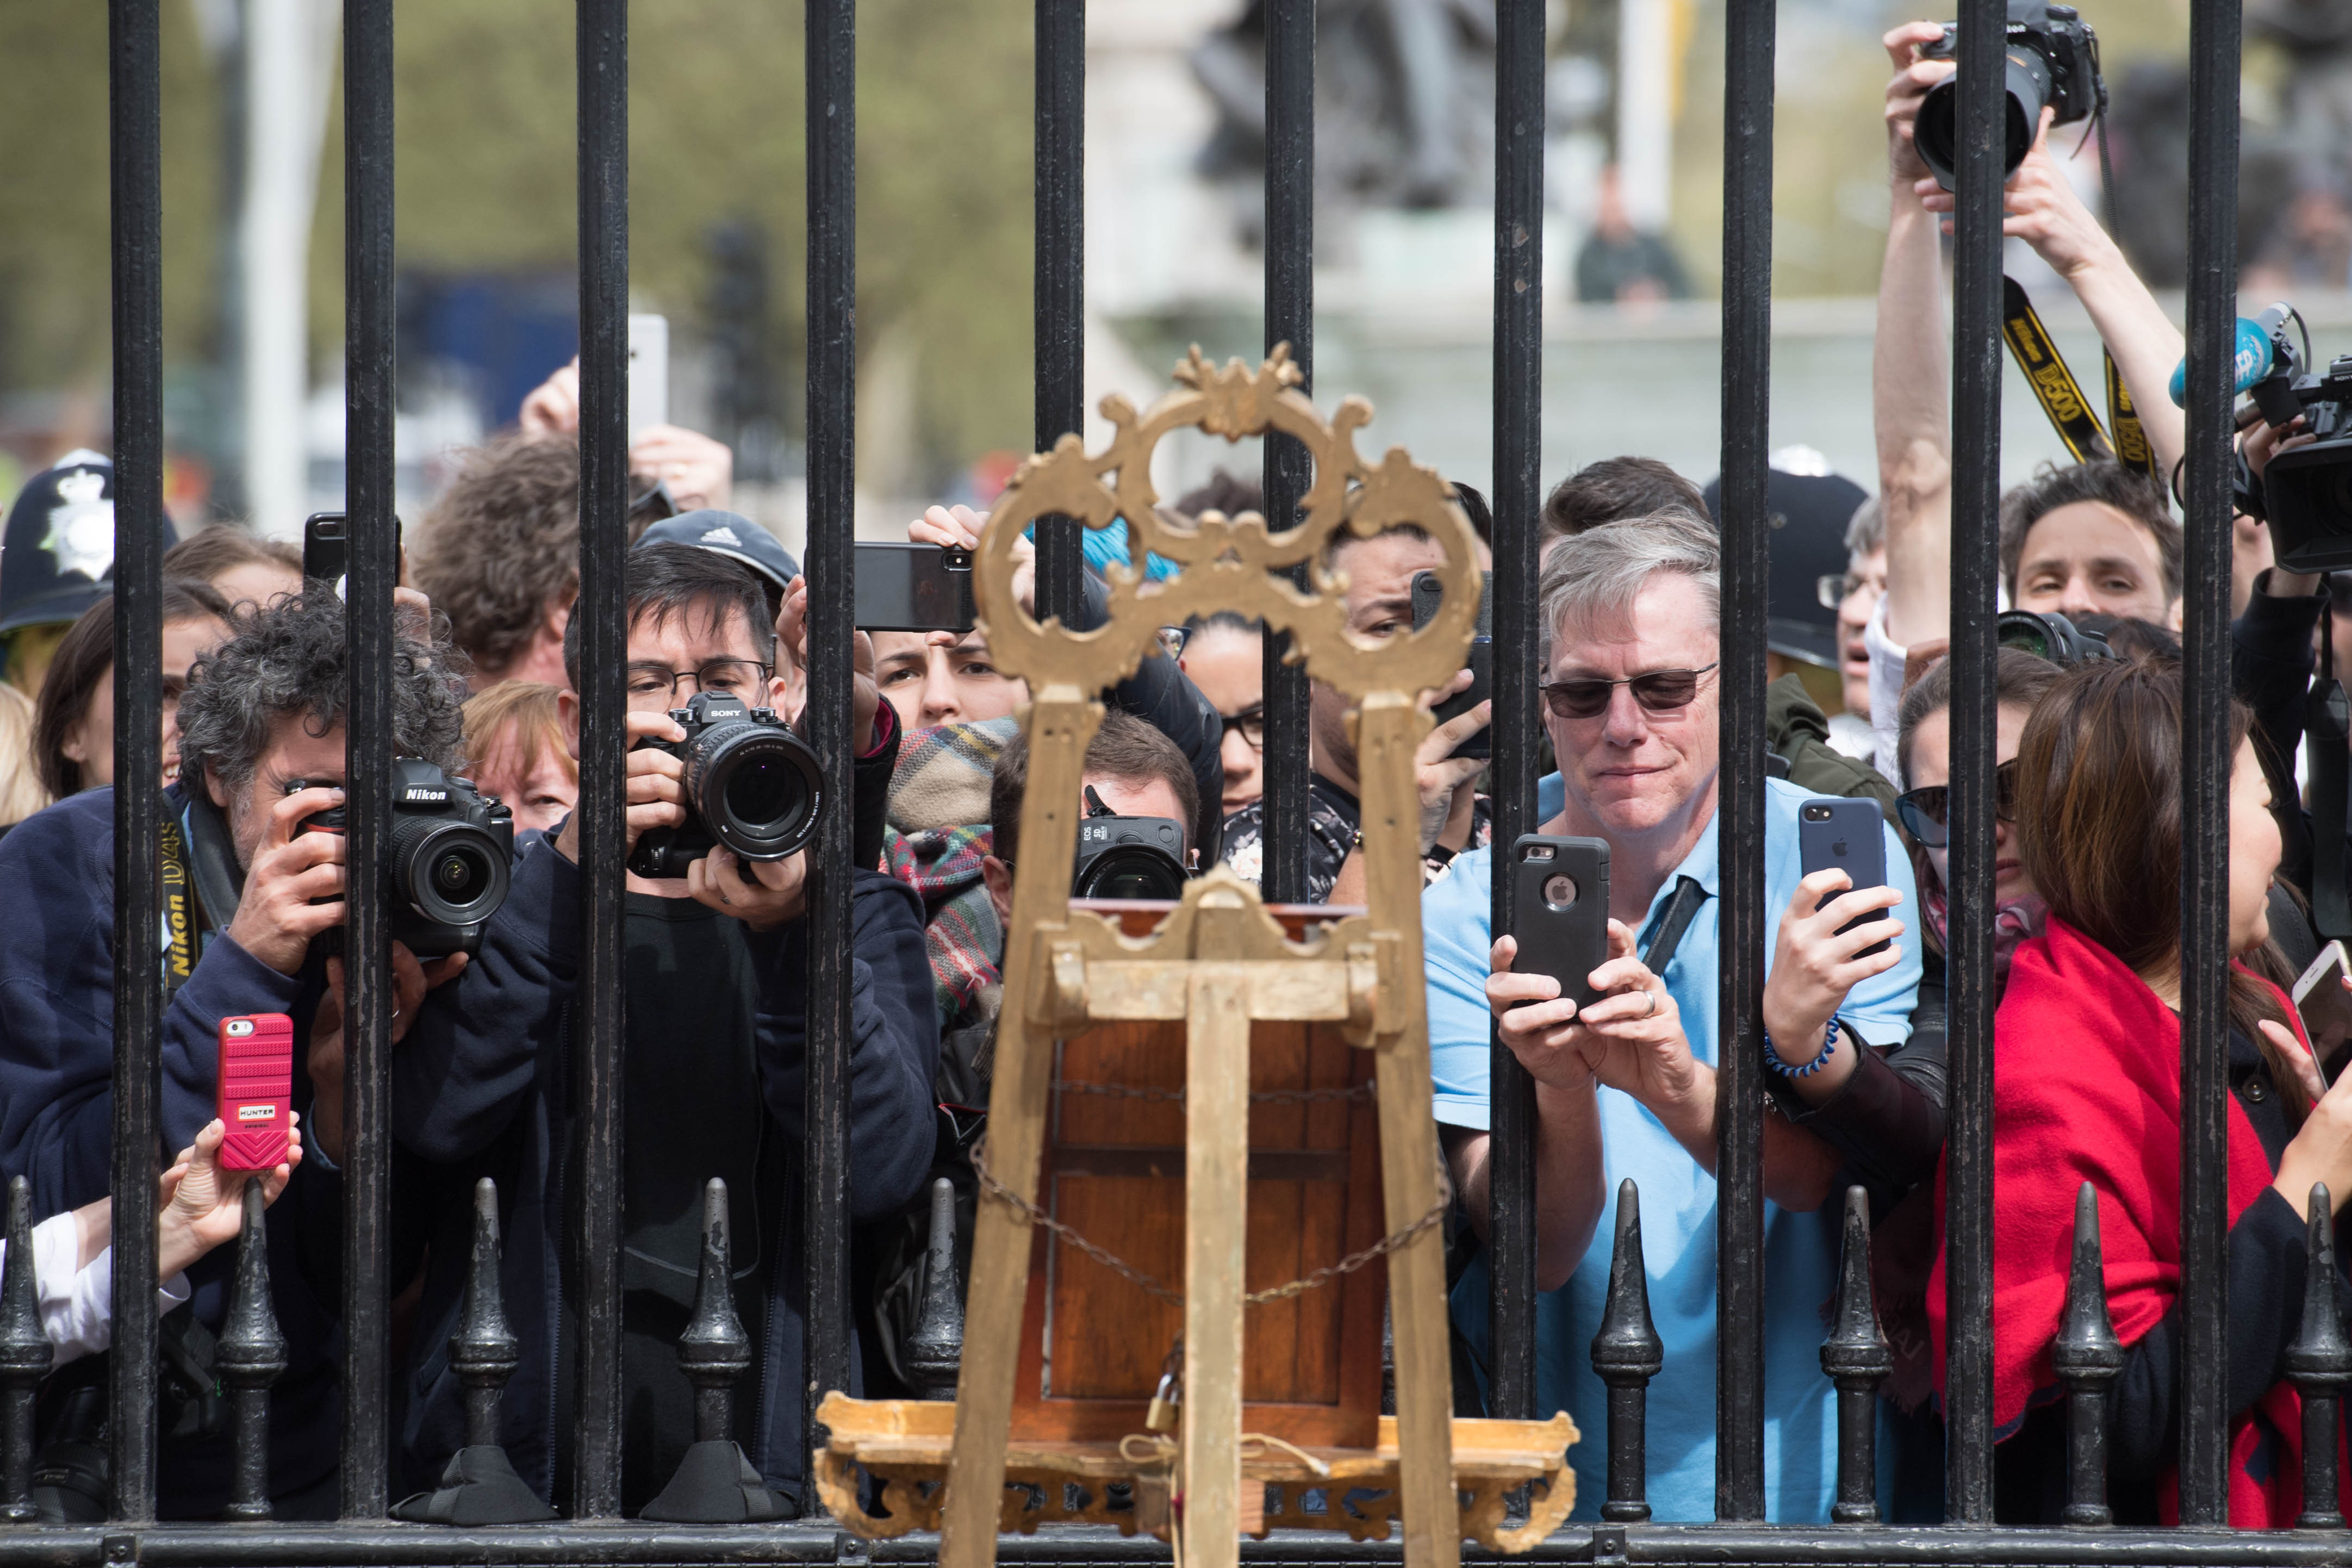 Tourists and photographers take pictures of a notice on an easel in the forecourt of Buckingham Palace in London to formally announce the birth of a baby boy to the Duke and Duchess of Cambridge at St Mary's Hospital